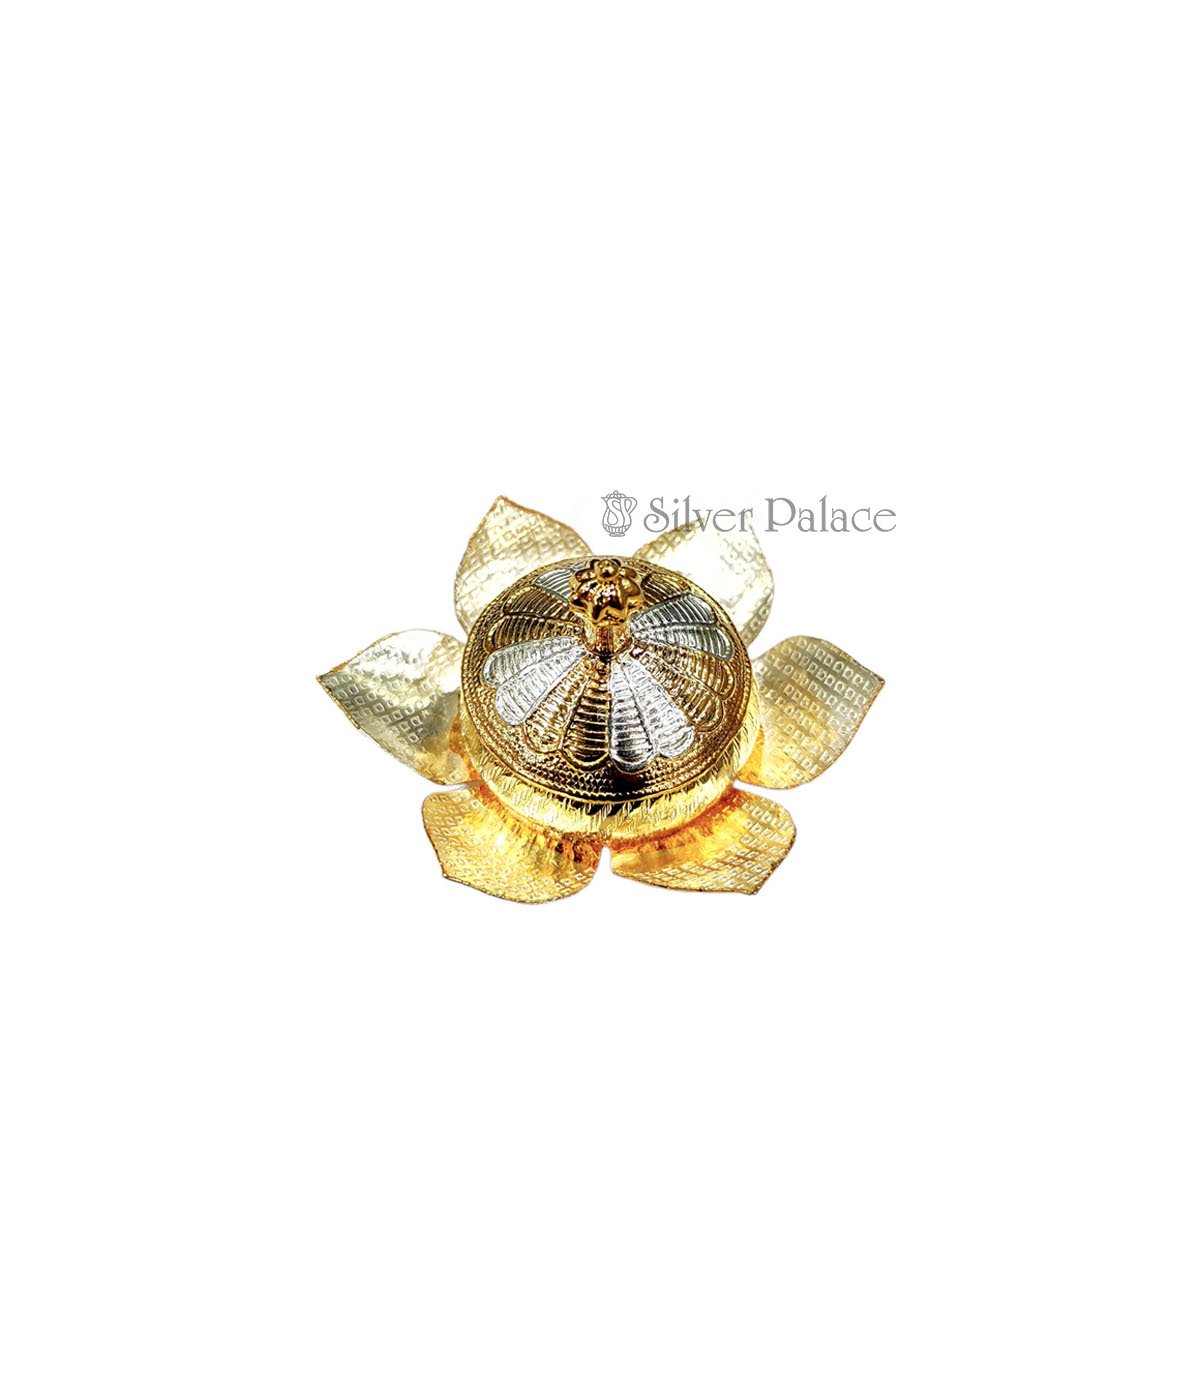 92.5 PURE SILVER GOLD POLISHED FLORAL DESIGN SINDOOR BOX